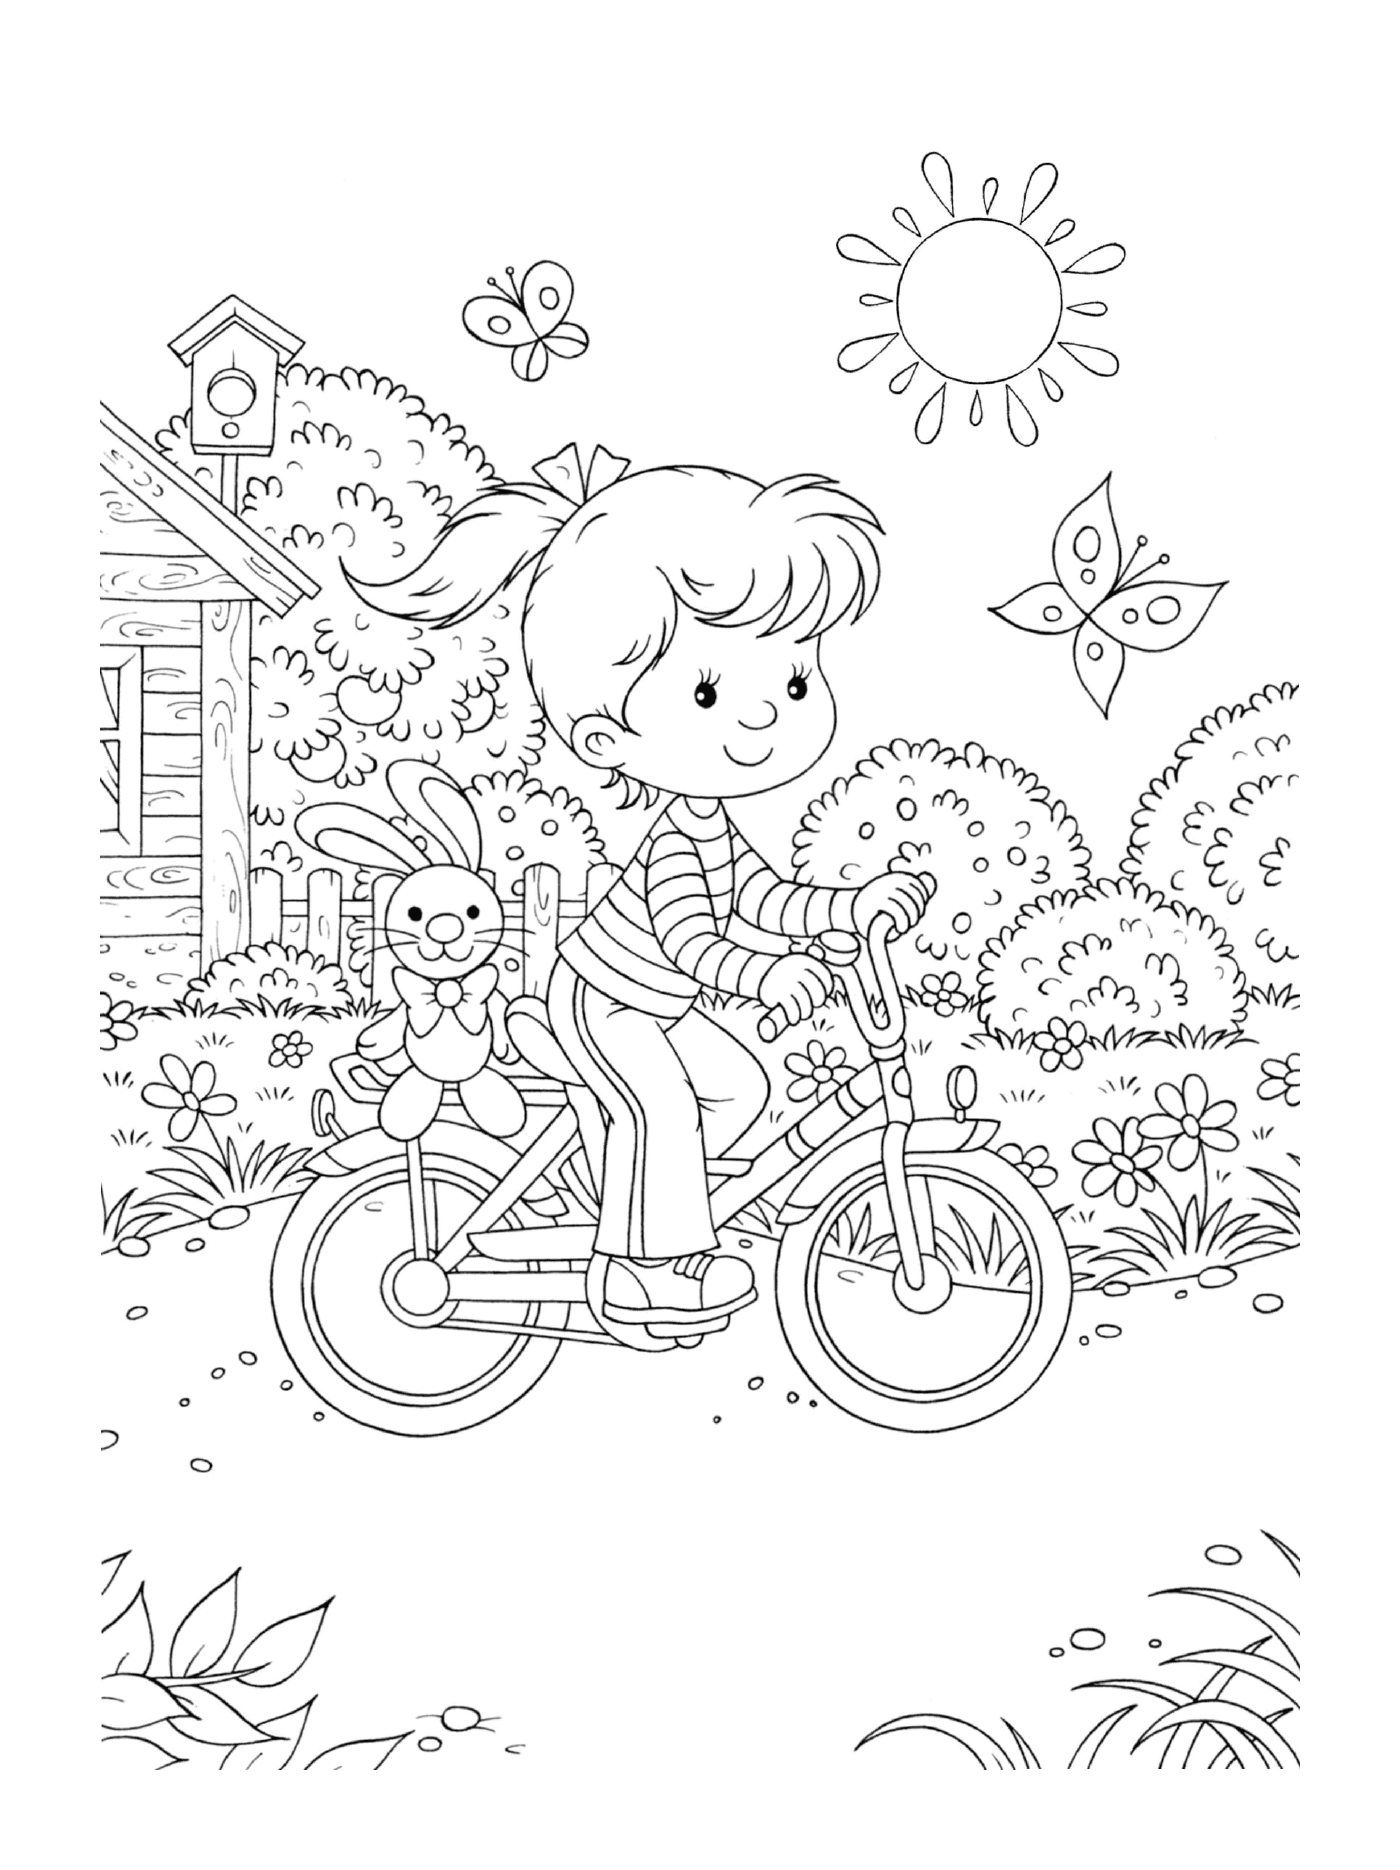  A little girl rides a bike with a rabbit in the back 